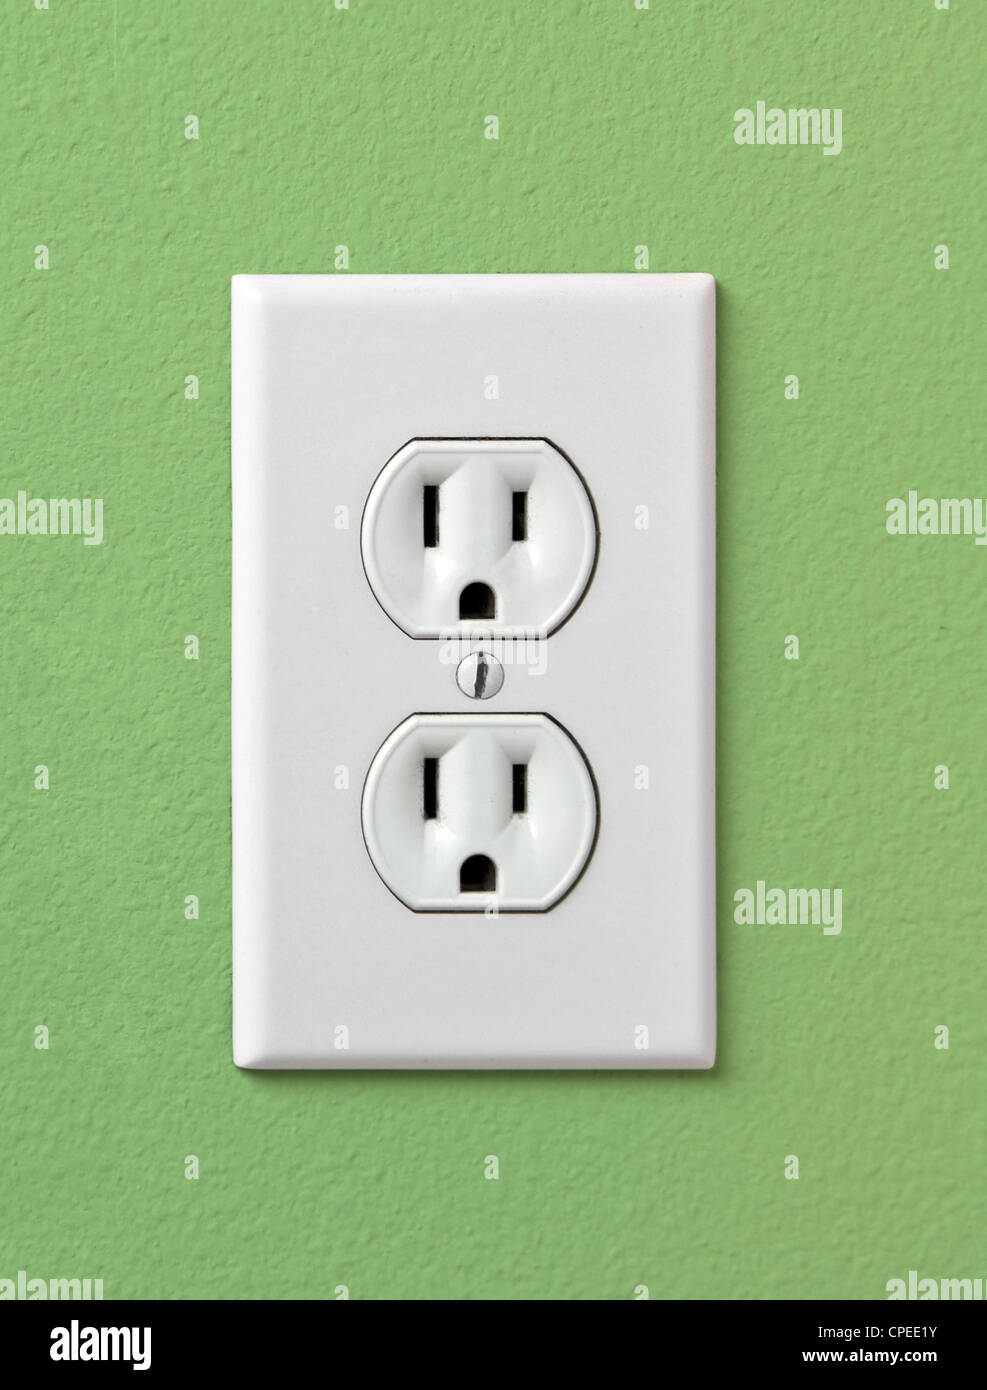 Electrical House Outlet 110 United States Stock Photo